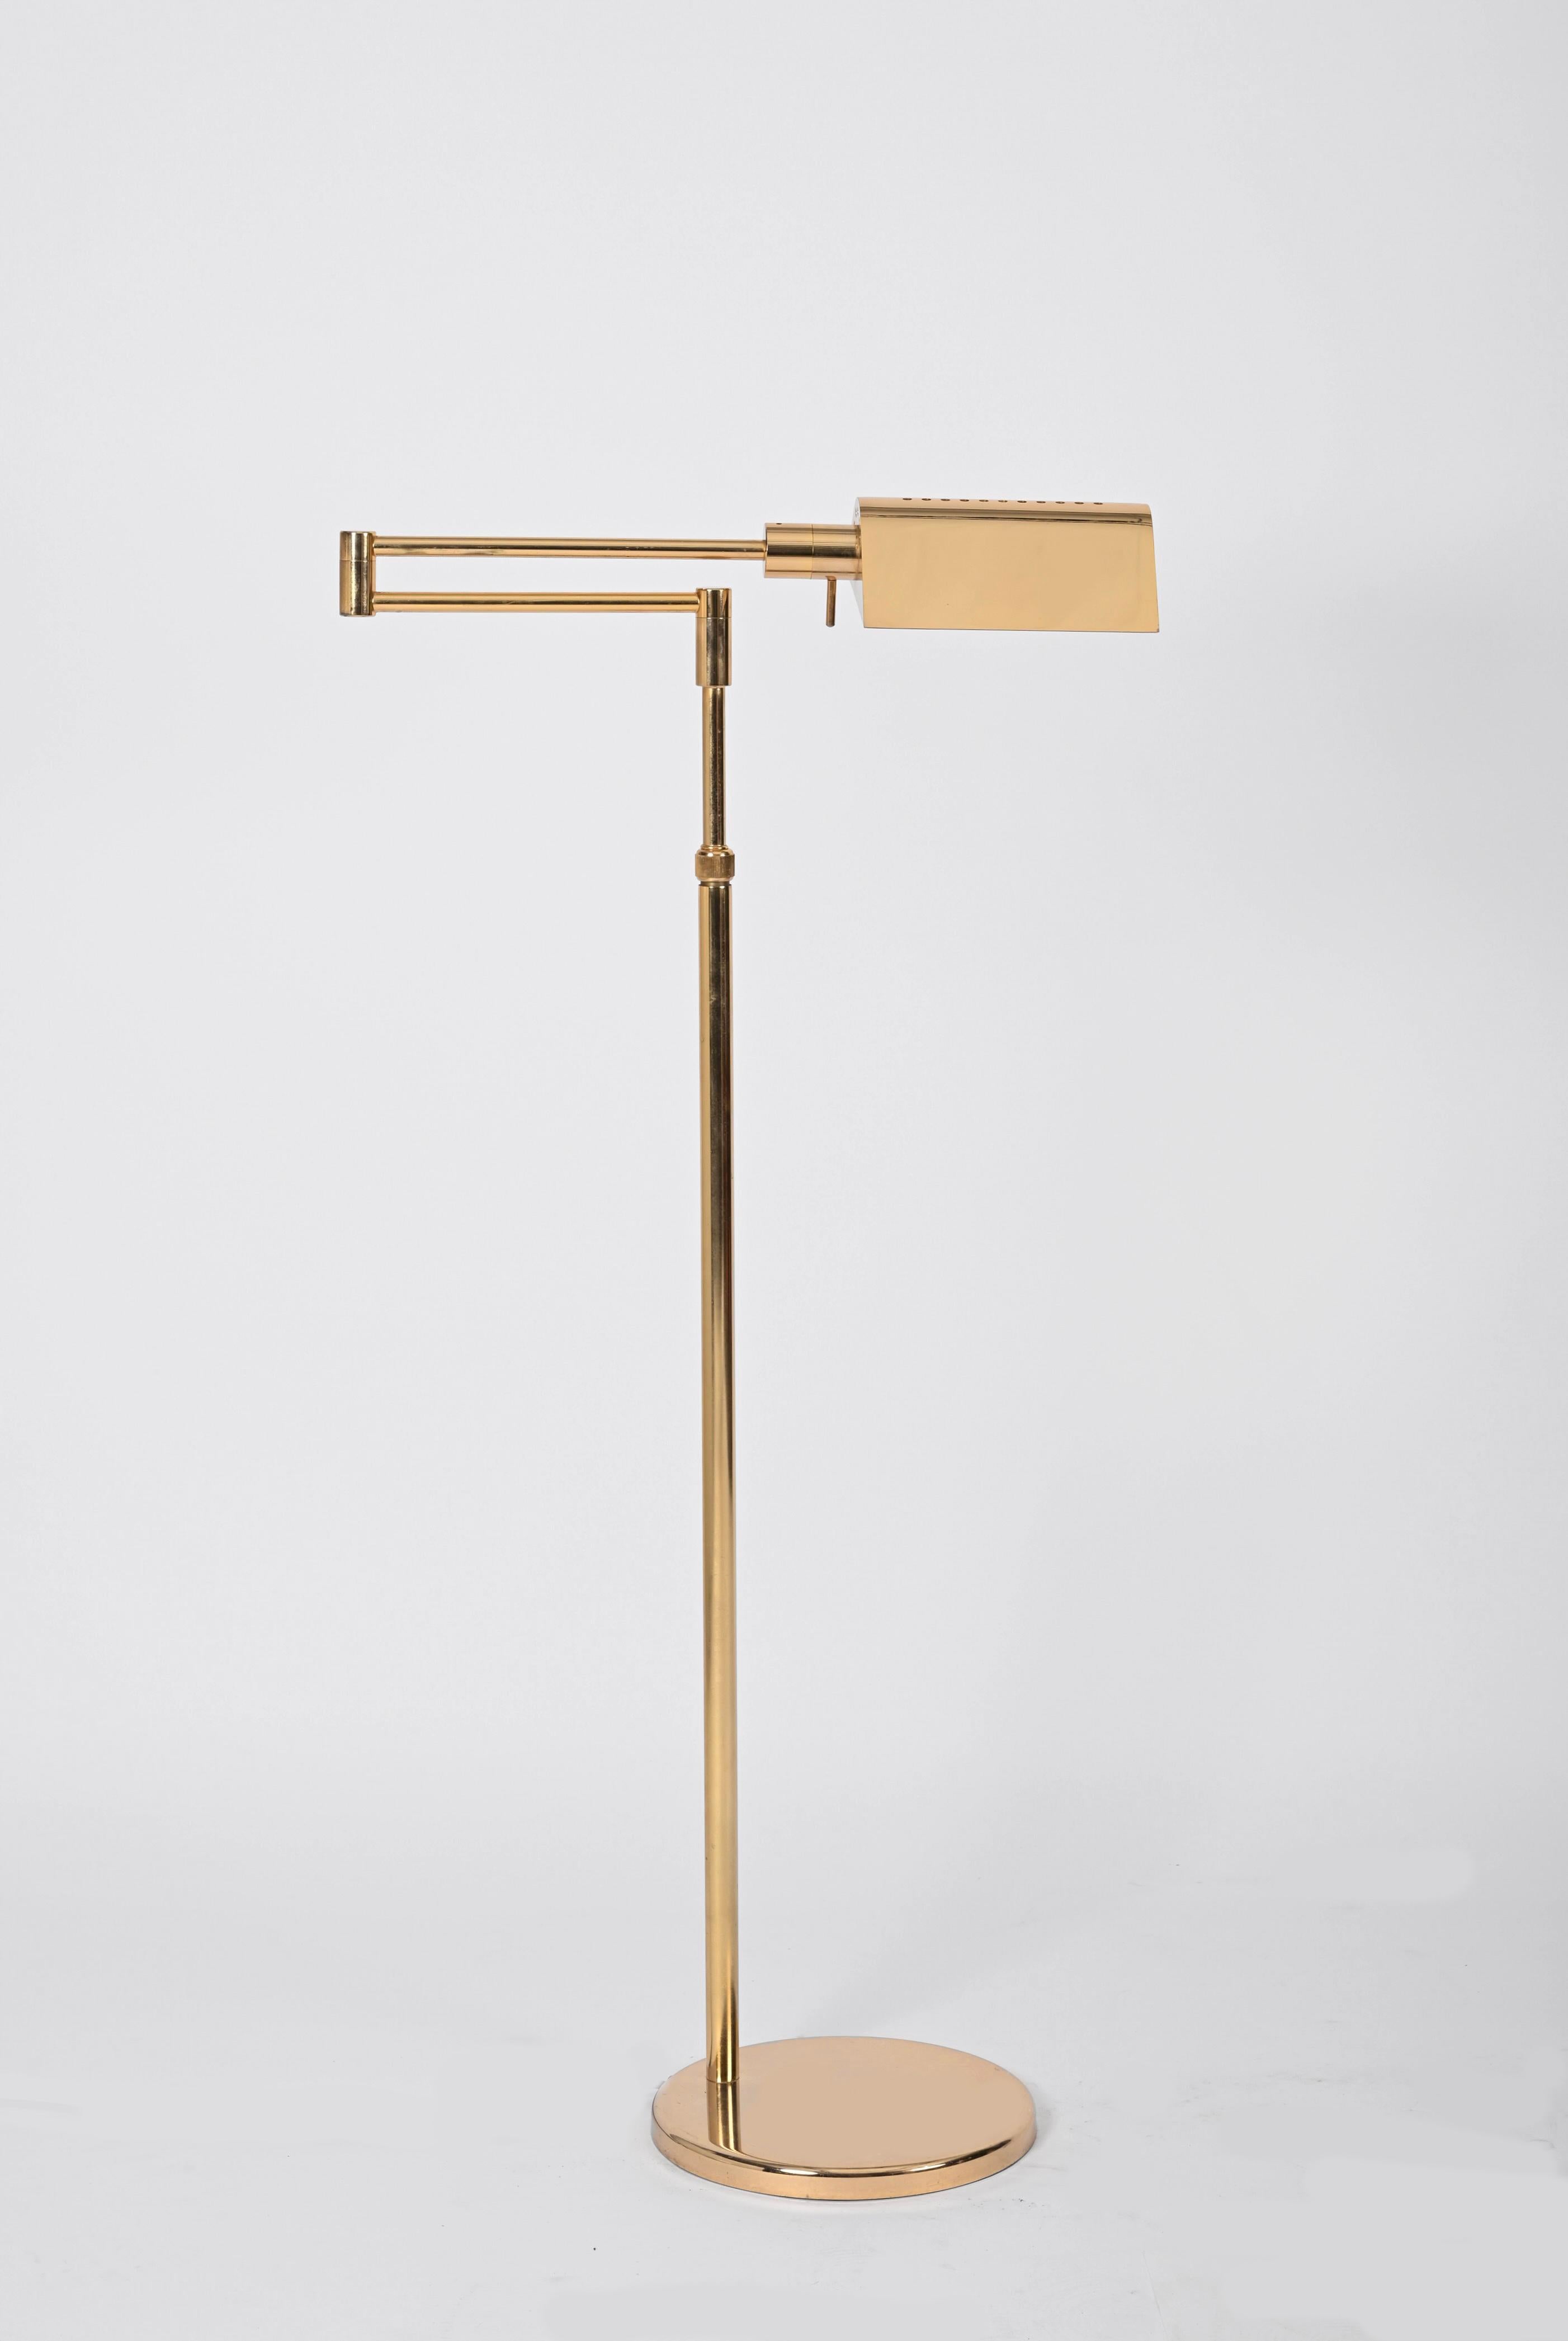 Gorgeous midcentury adjustable floor lamp in gilded brass. This stunning lamp is signed on the light switch by Gianfranco Frattini and was produced in Italy during 1970s. 

This elegant floor lamp is fully adjustable in height along the body and